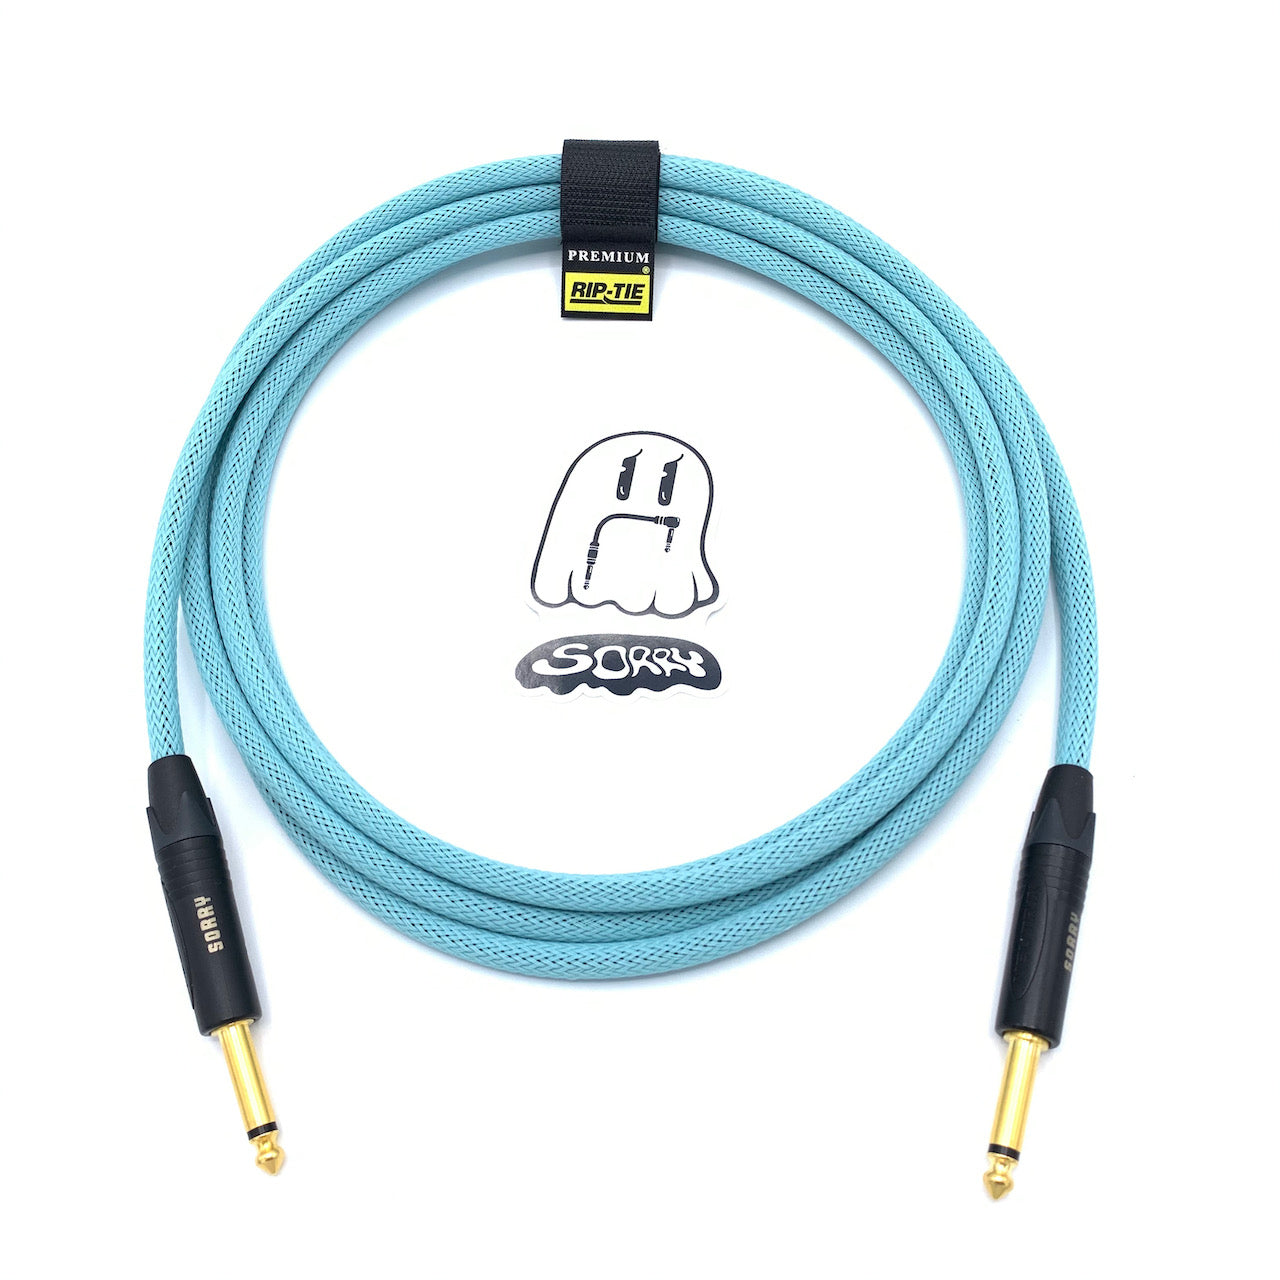 SORRY Straight to Straight Guitar / Instrument Cable - Aqua Blue